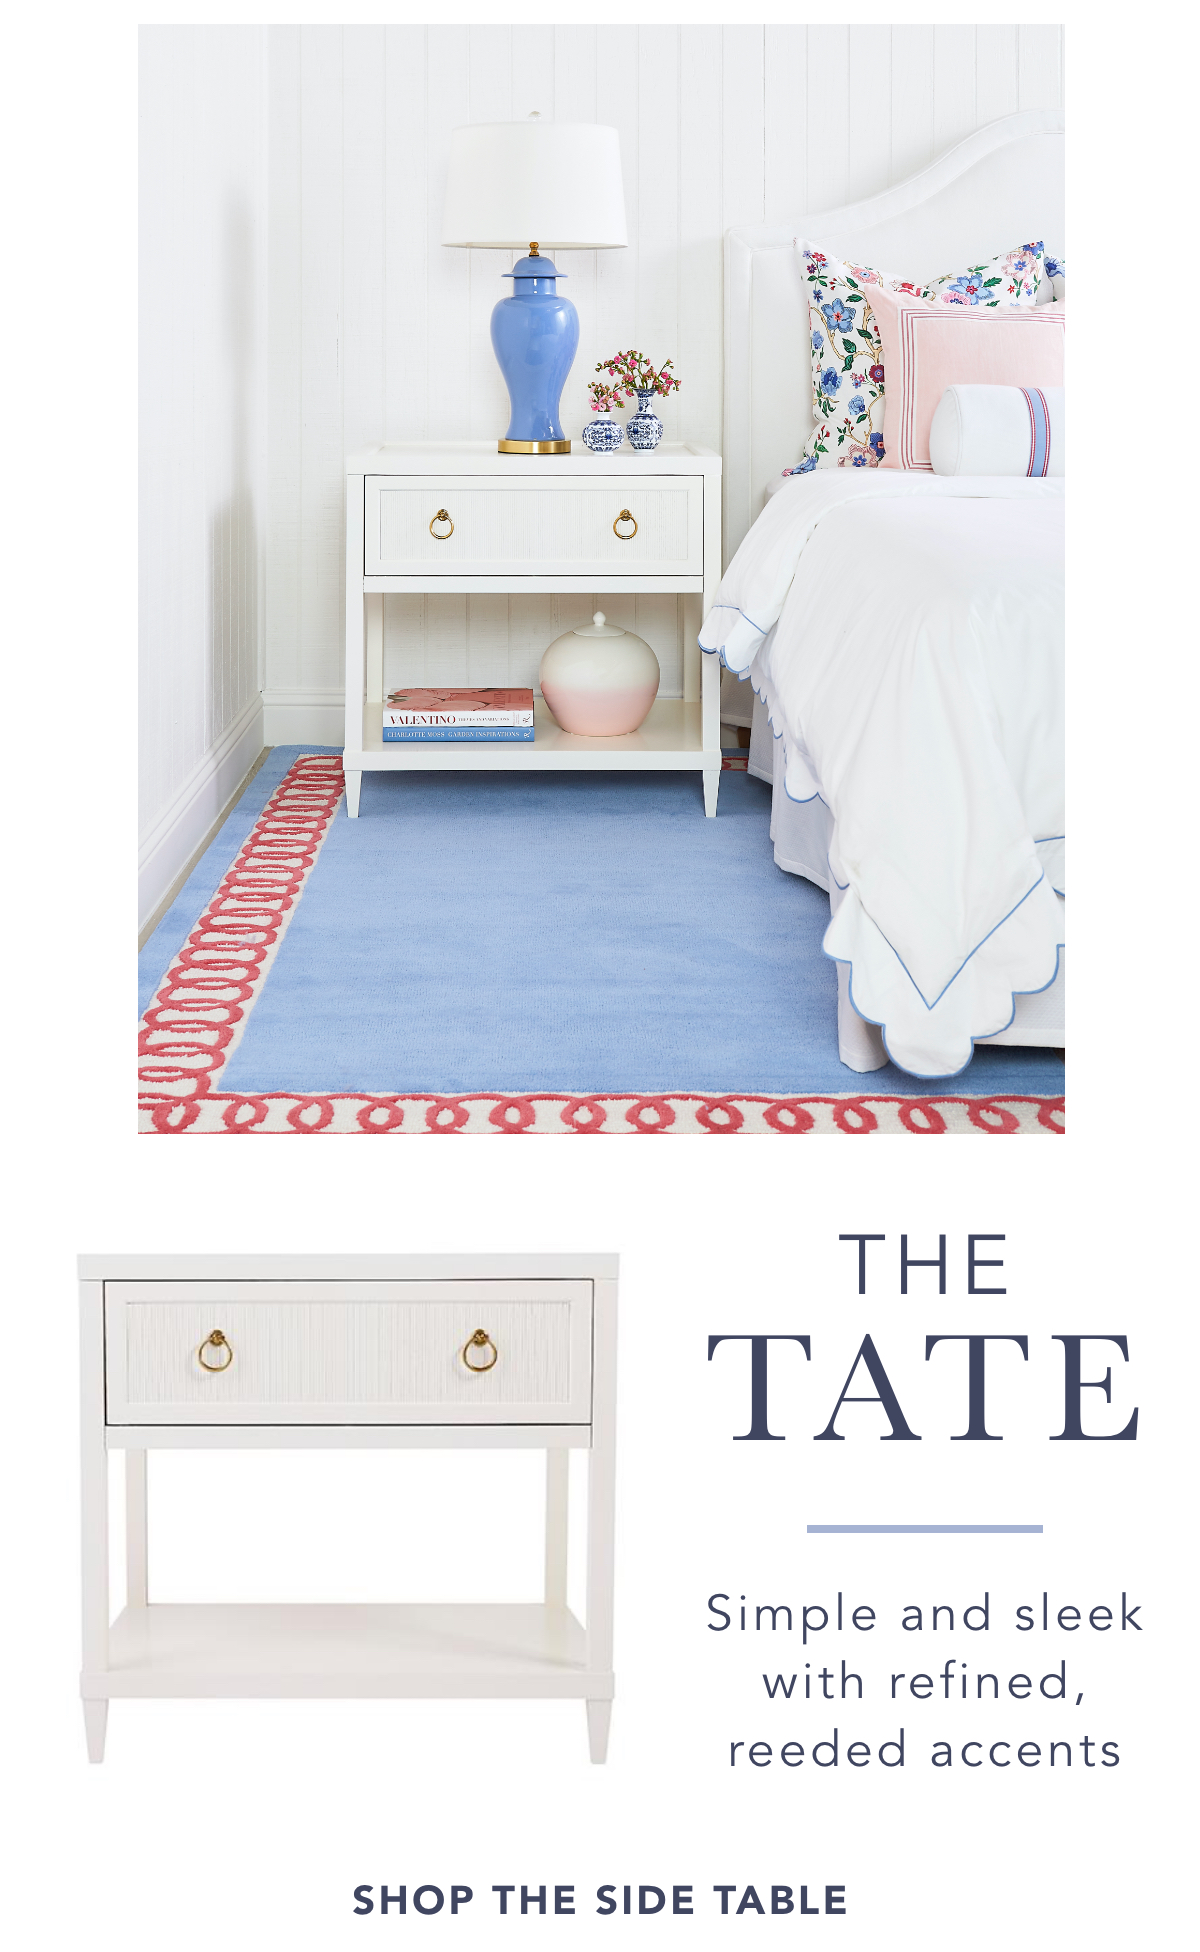 The Tate - Simple and sleek with refined, pleated accents